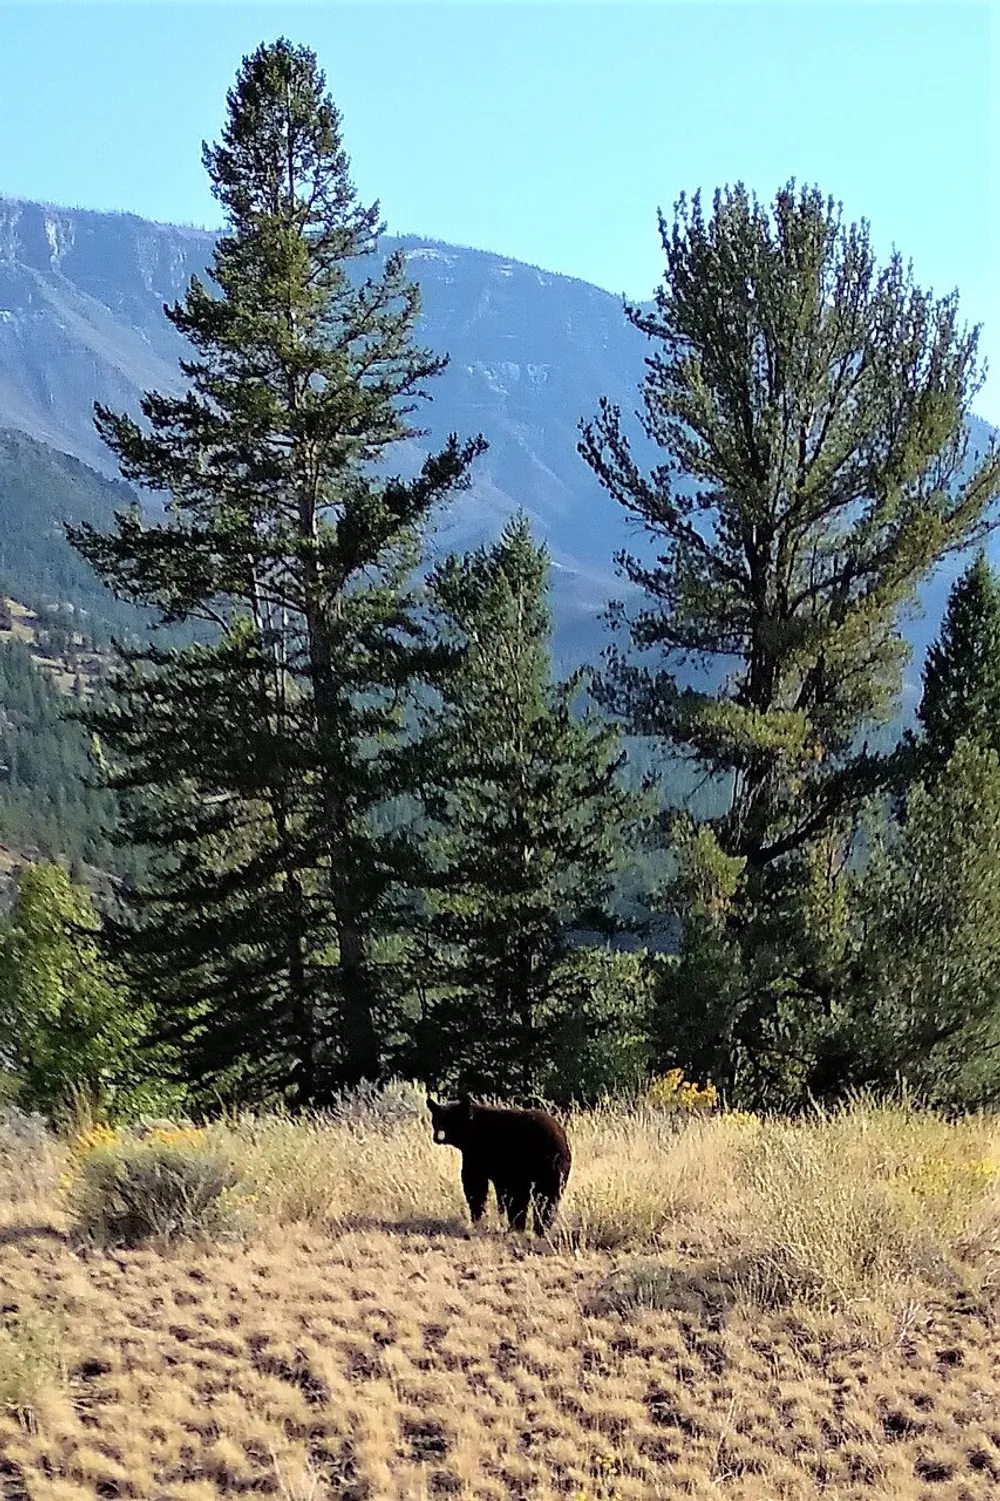 A bear is seen wandering through a grassy clearing with a backdrop of tall trees and mountainous terrain